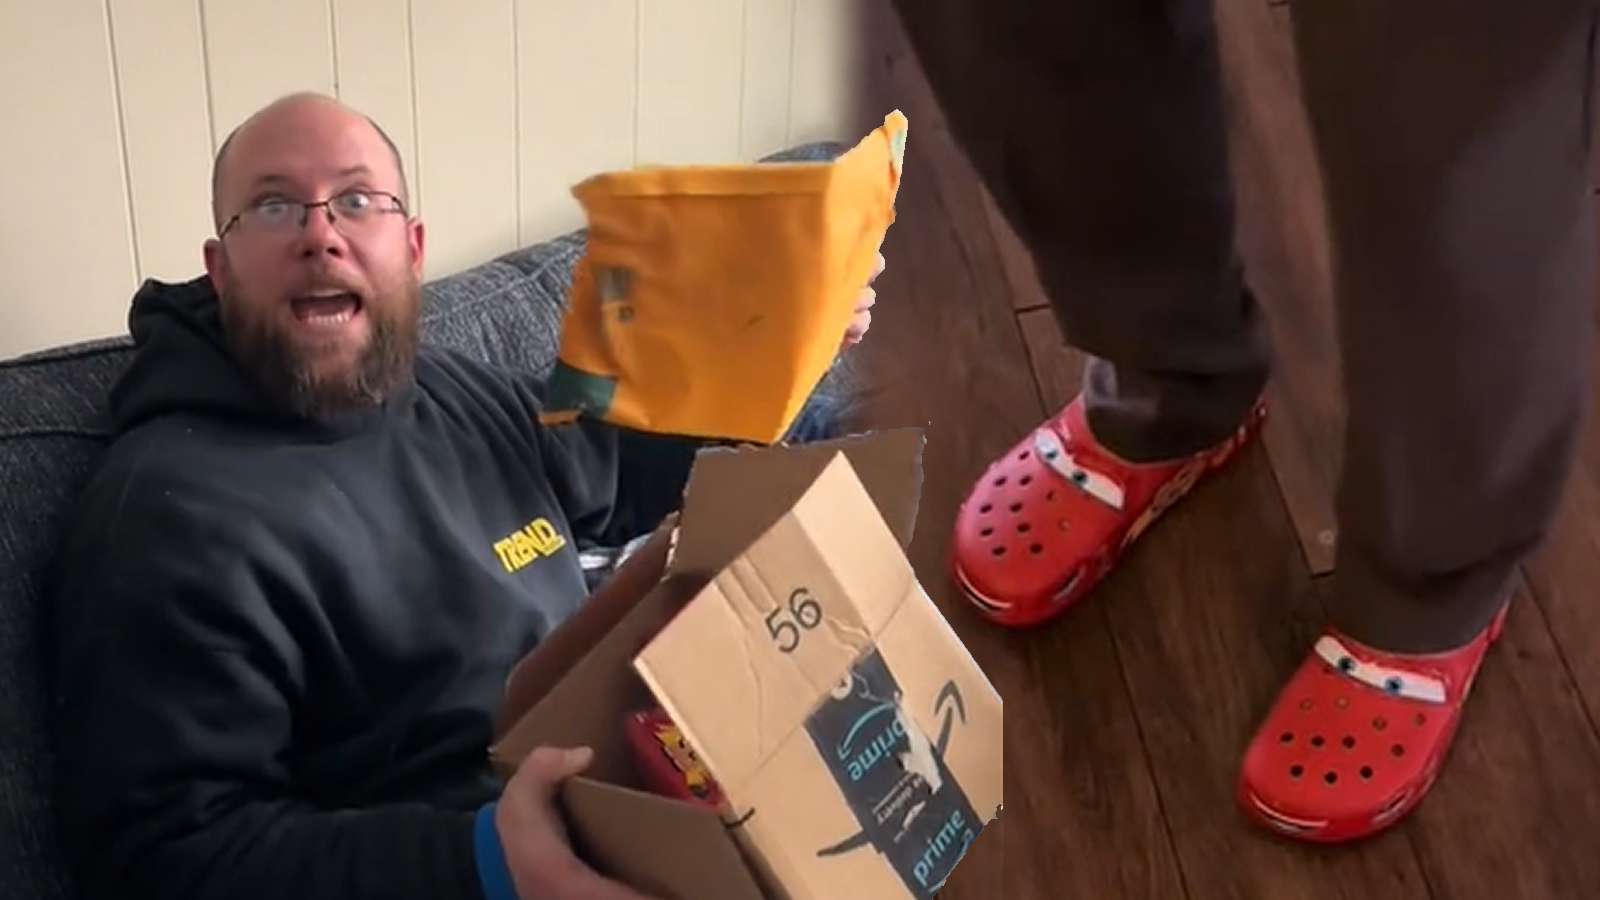 Man experiences pure child-like excitement after being gifted Lightning McQueen Crocs